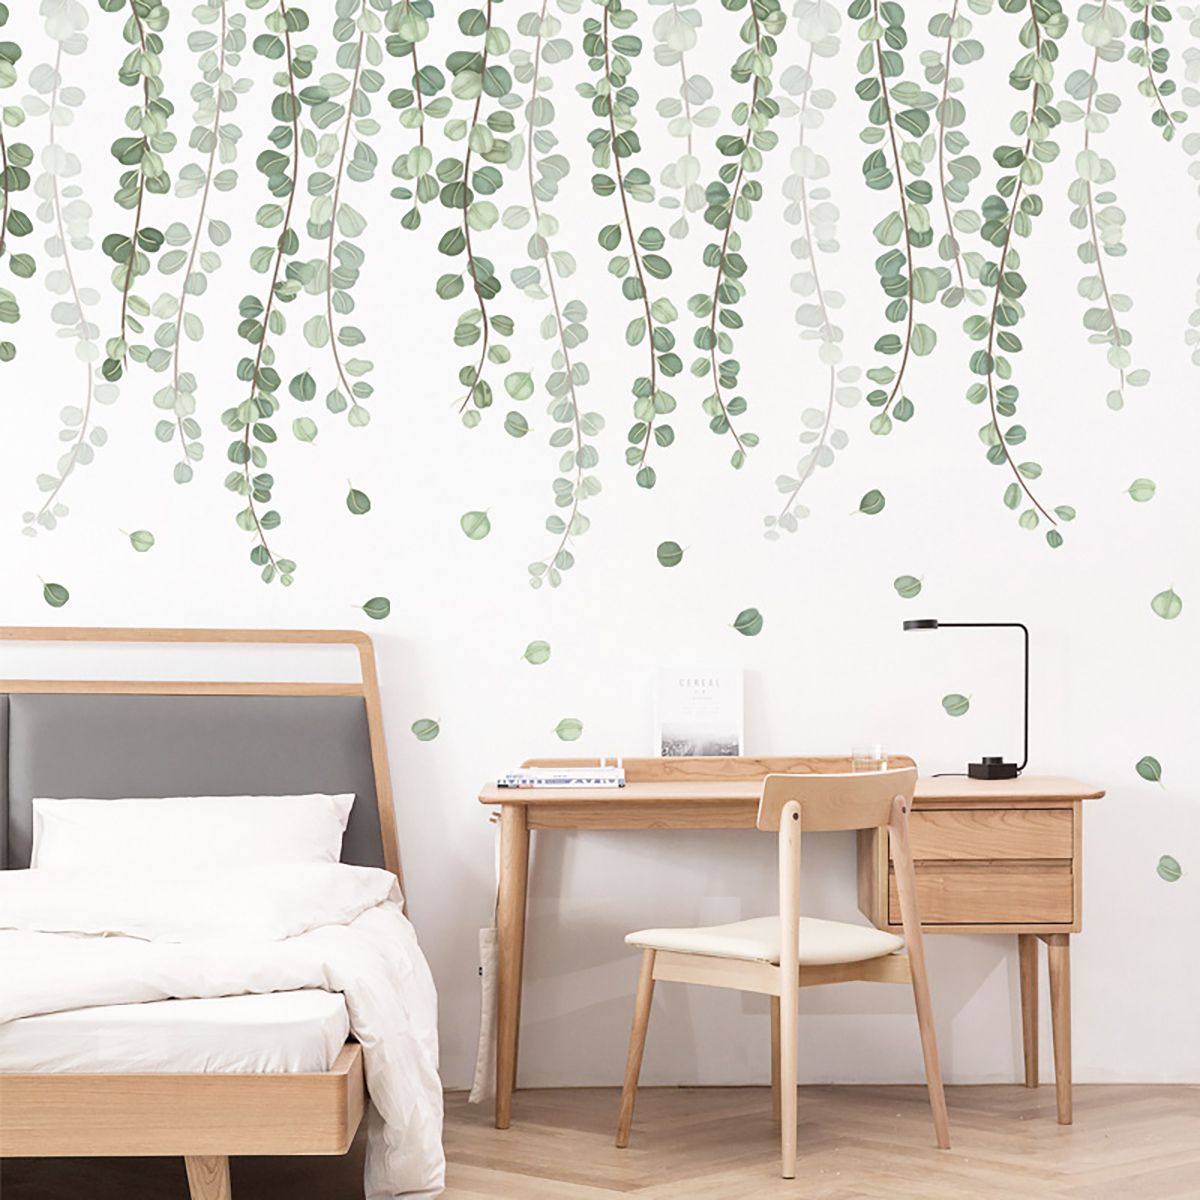 Large-Tropical-Leaves-Removable-Wall-Sticker-Decal-PVC-Mural-Home-Decor-Art-Gift-1713630